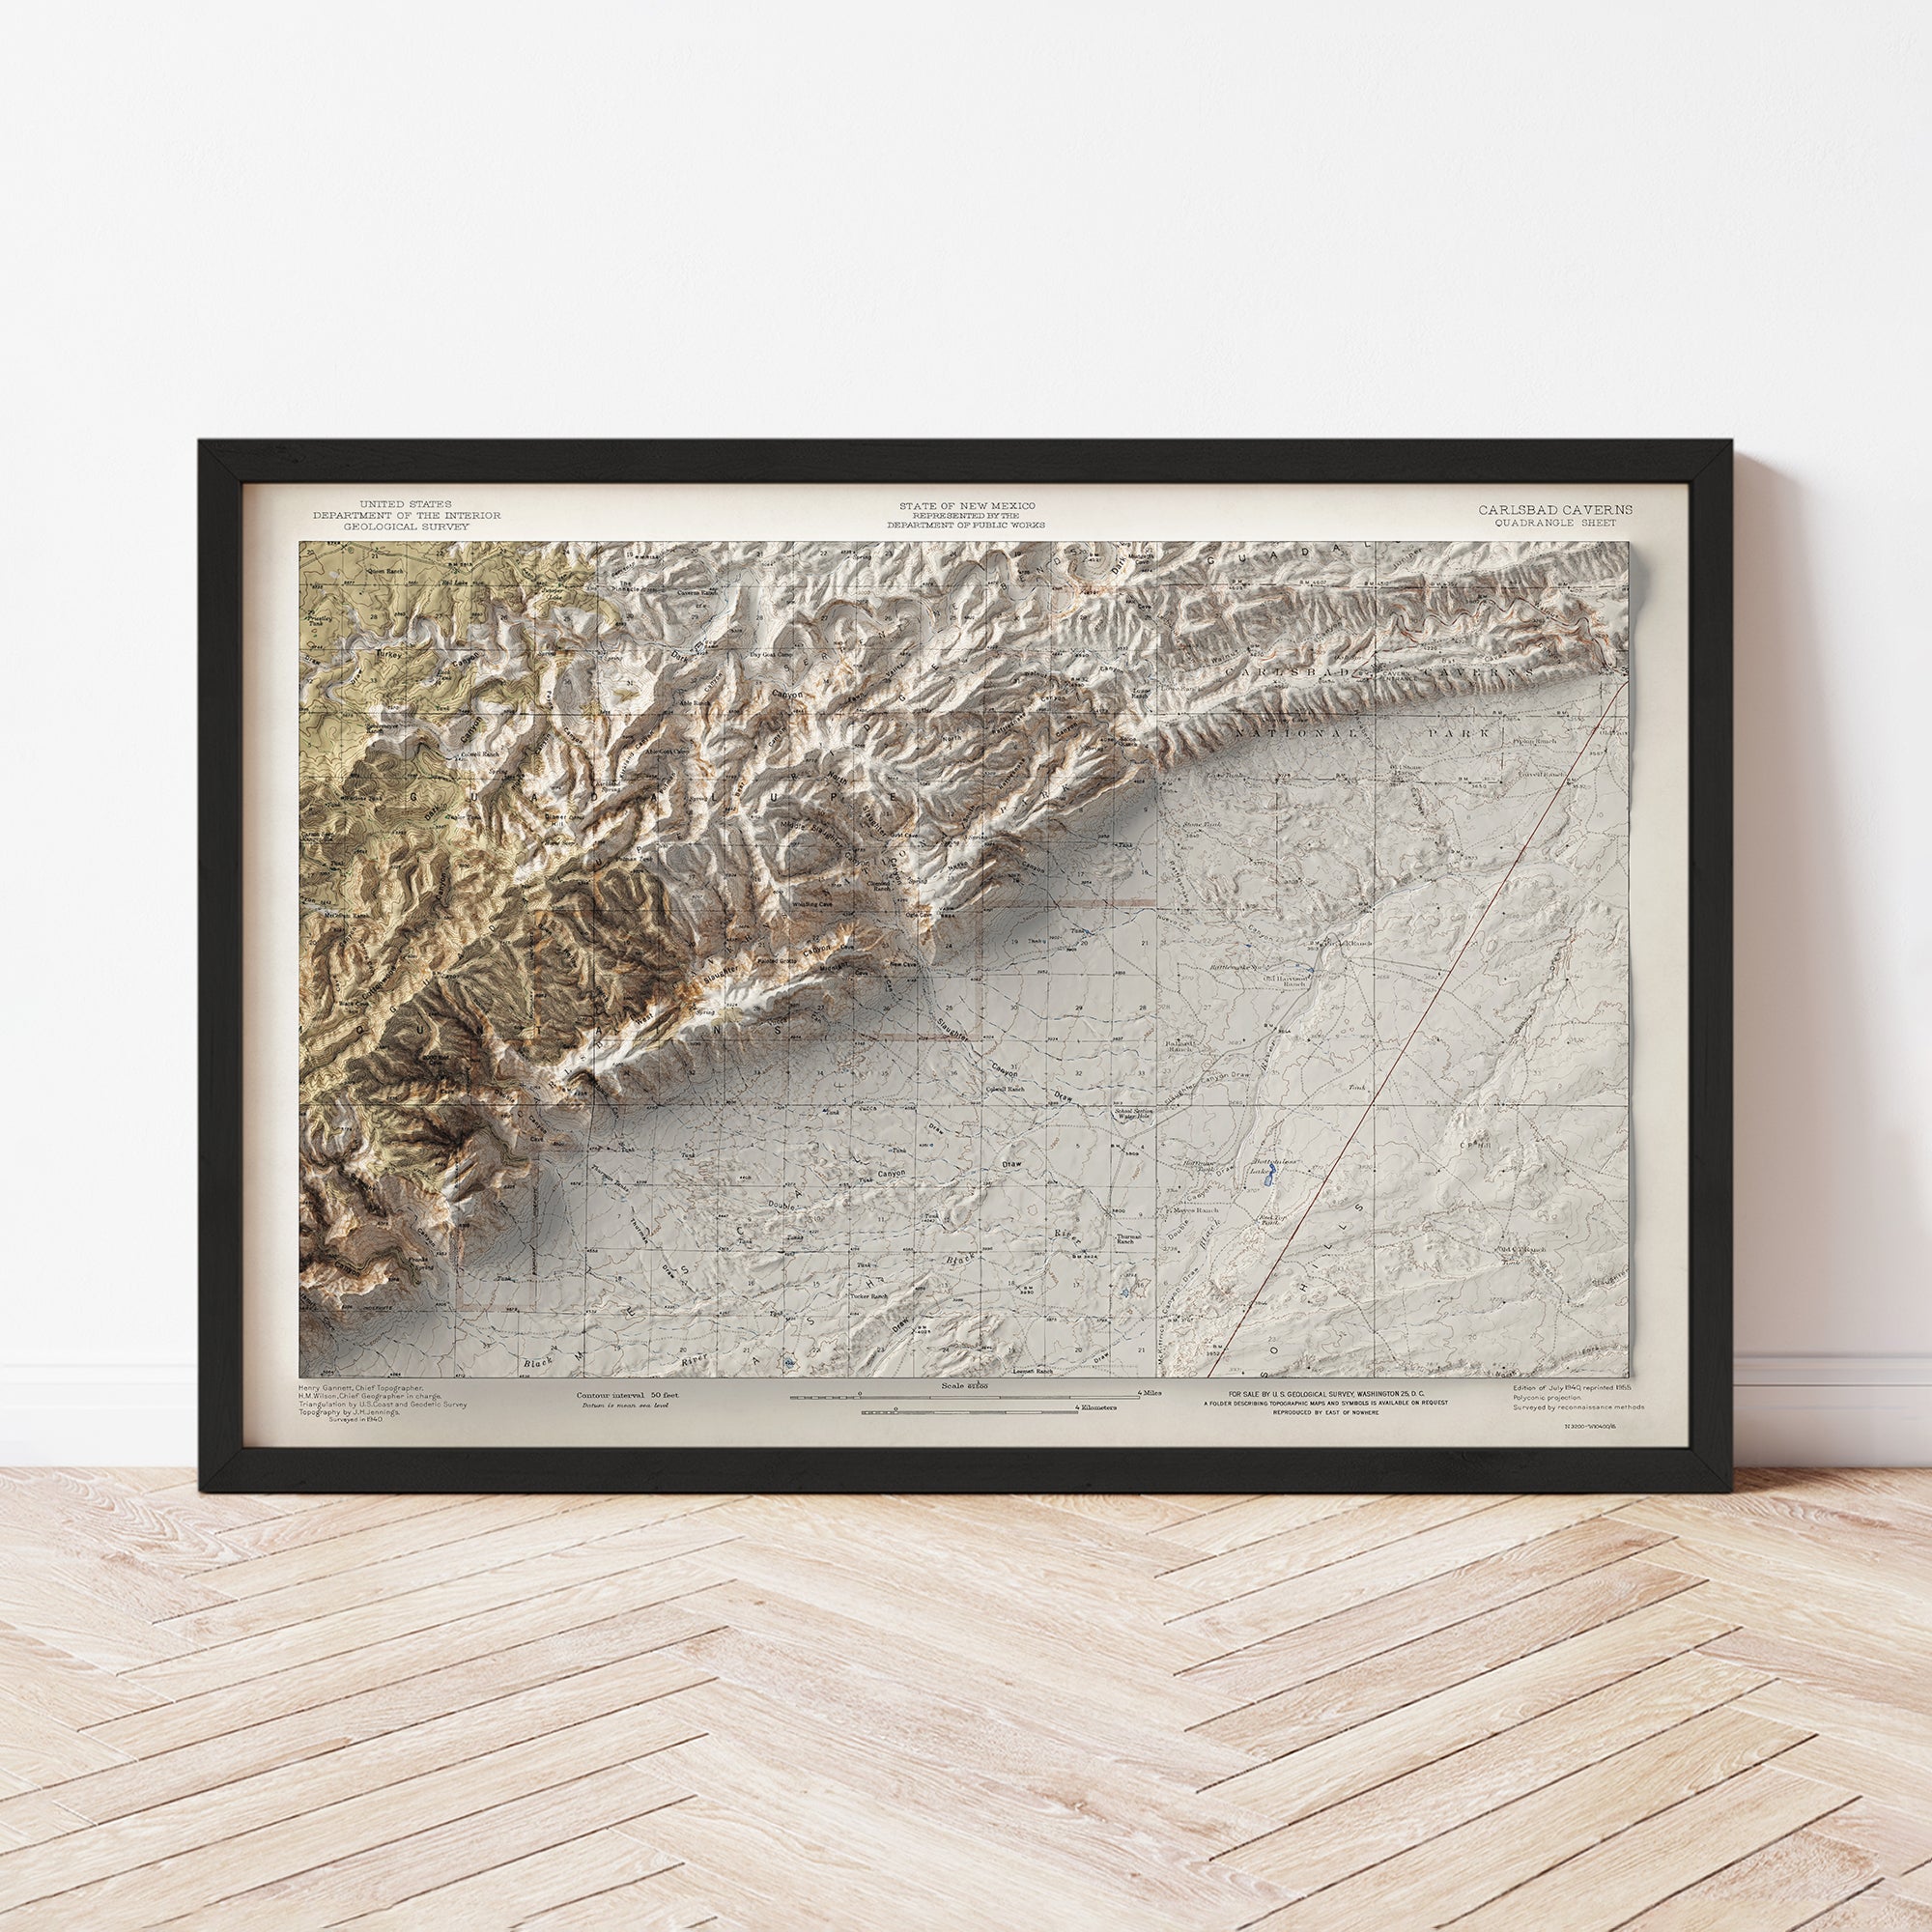 Carlsbad Canyons National Park, NM - Vintage Shaded Relief Map (1940)